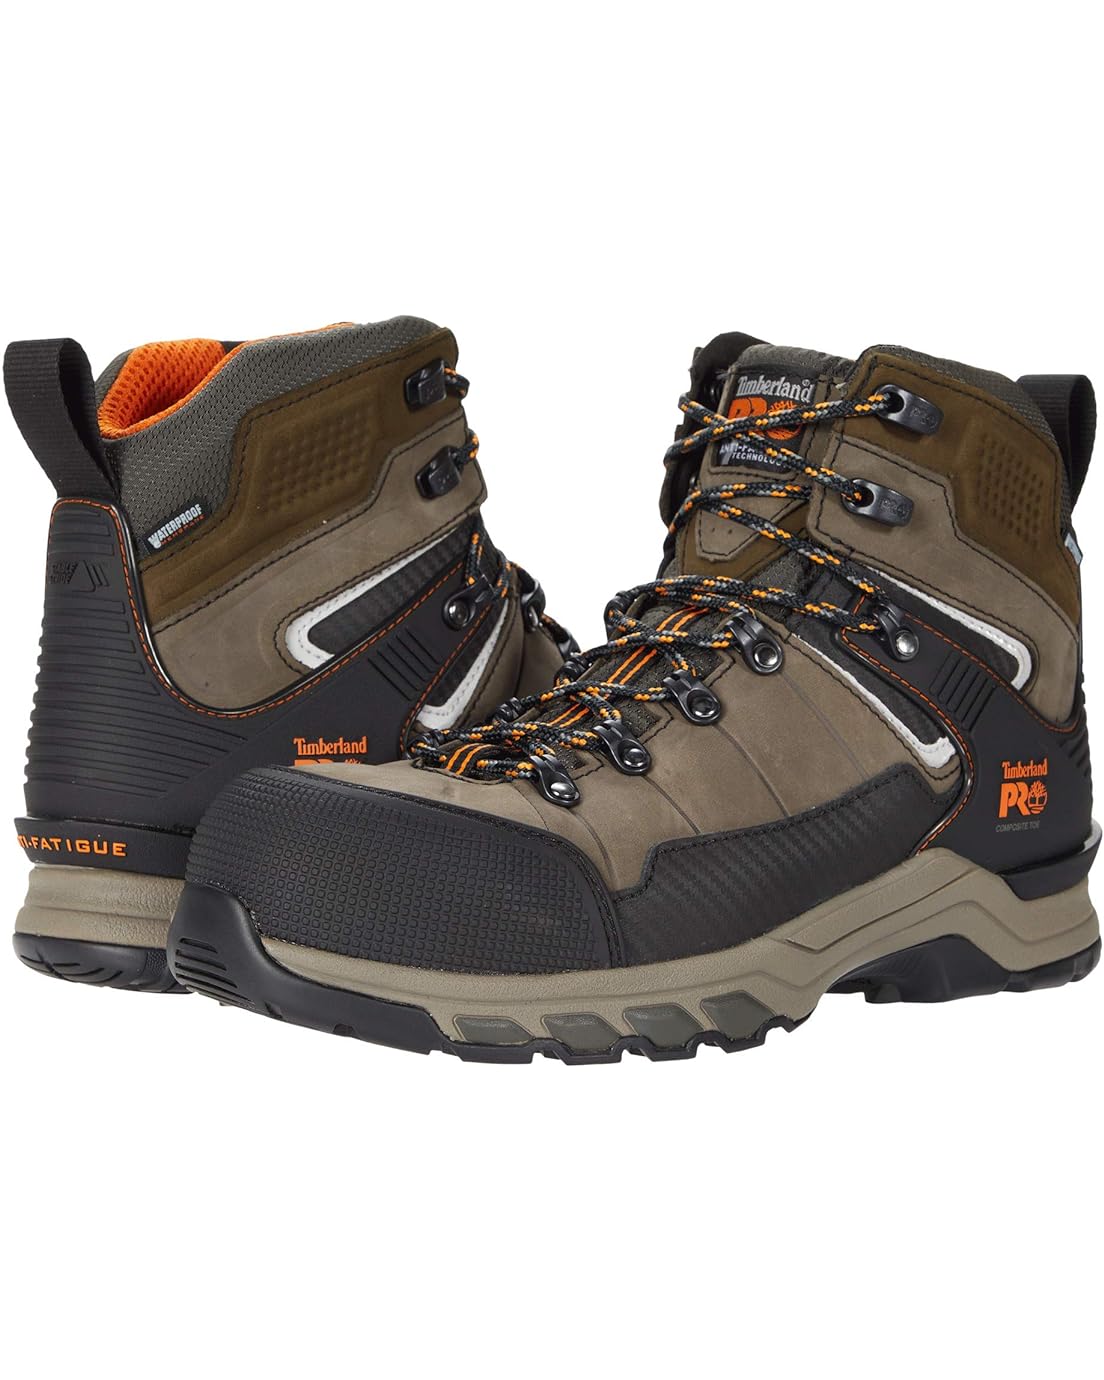 Timberland PRO Hypercharge TRD Waterproof Composite Safety Toe